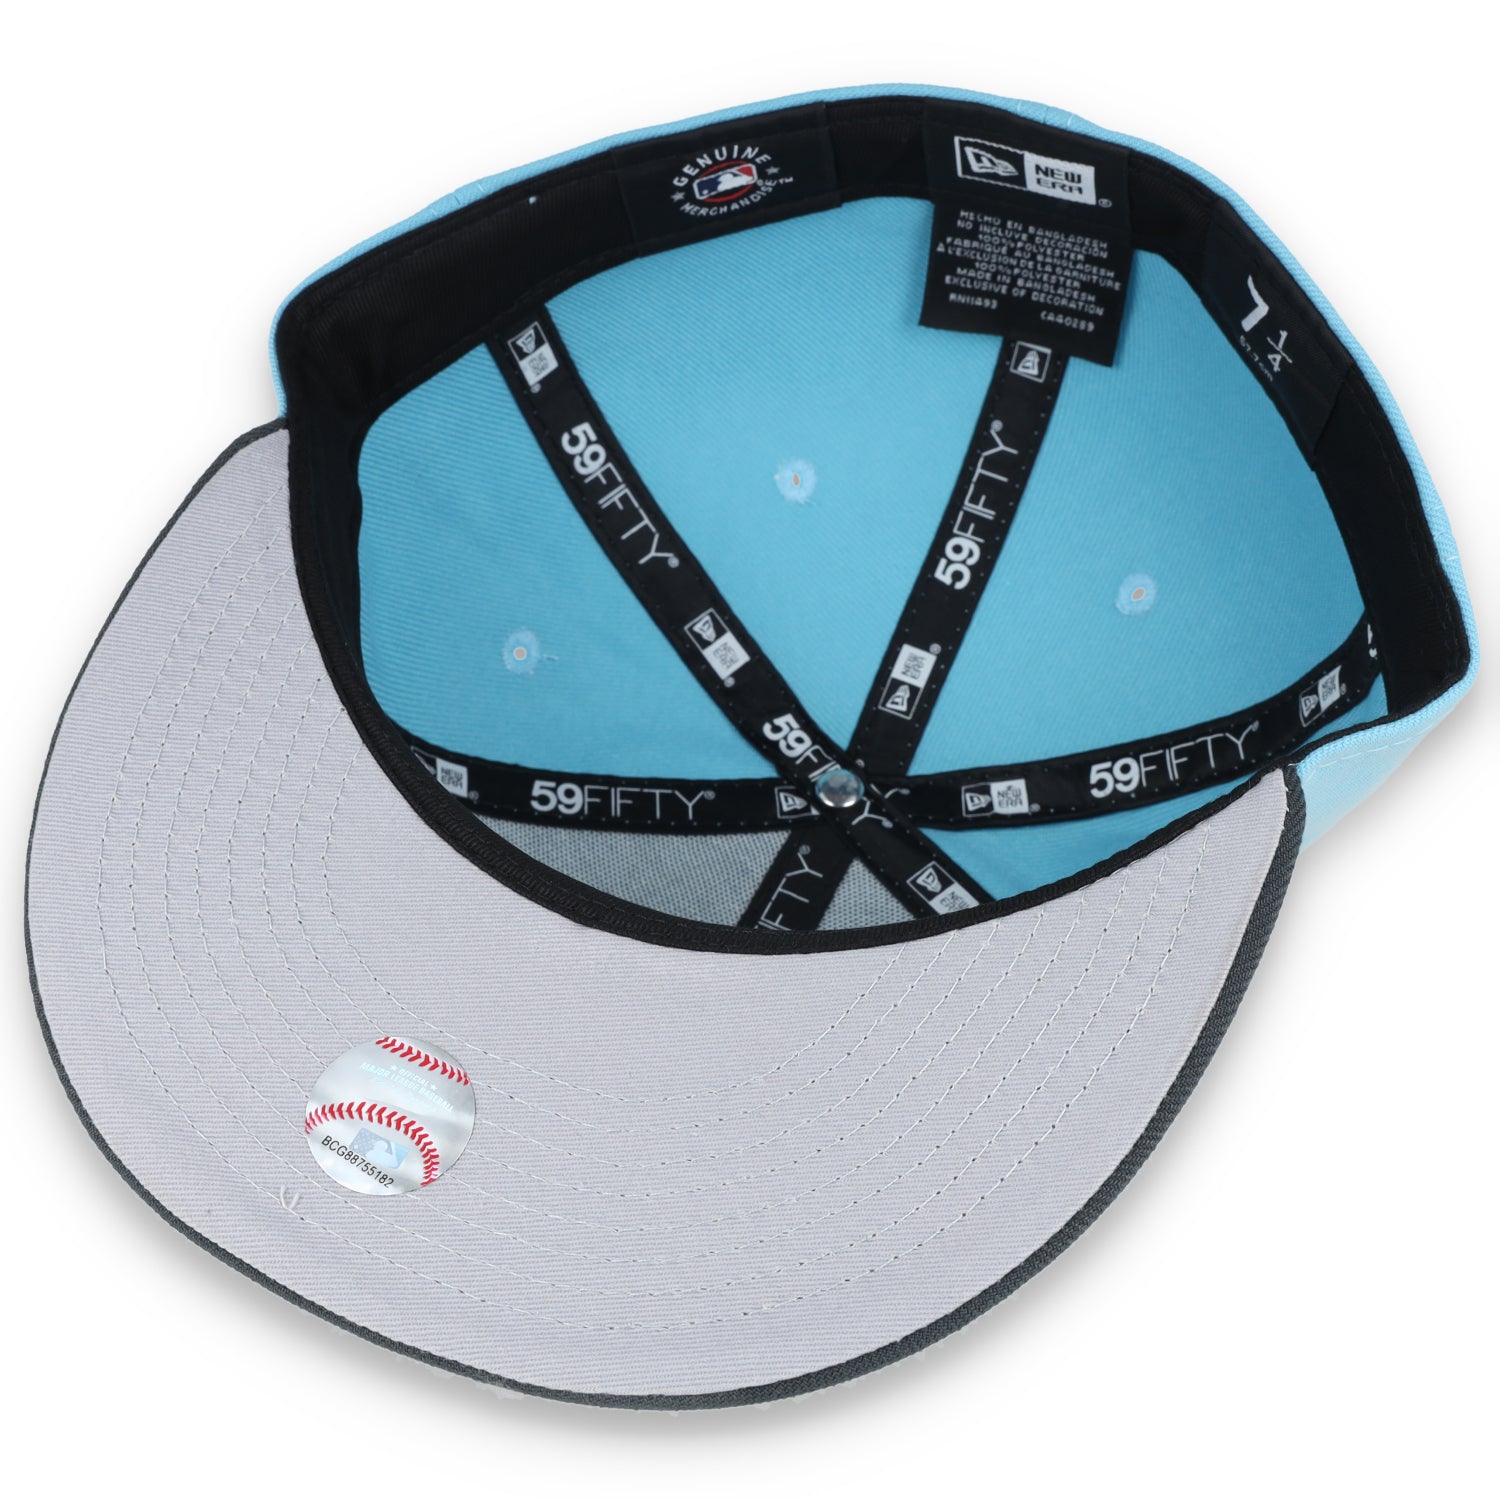 NEW ERA PITTSBURGH PIRATES 59FIFTY COLOR PACK-BABY BLUE/GREY